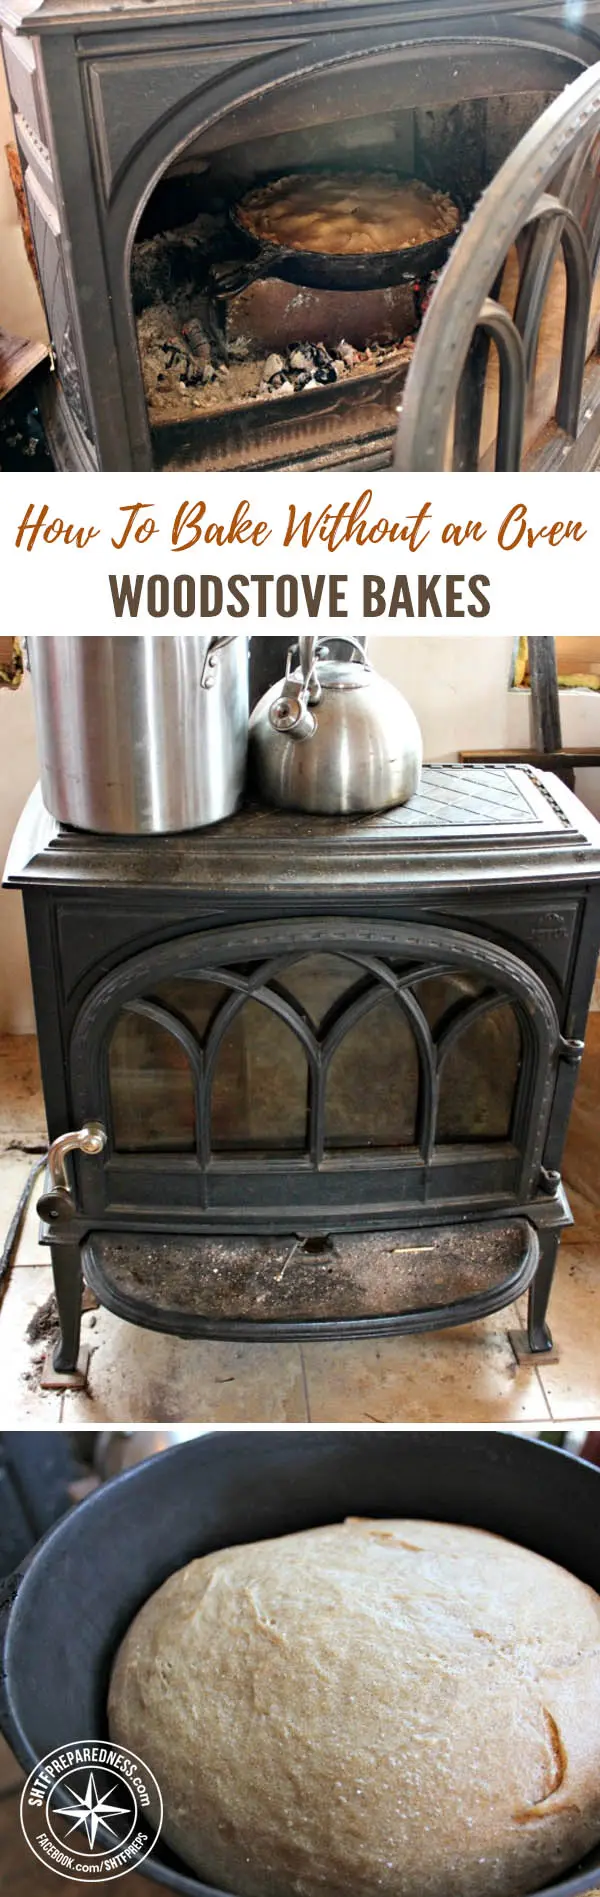 Baking Without an Oven - Woodstove Bakes — One of my favorite parts of the holiday season is the food; the baked goods, in particular. Living off-grid doesn’t mean you can’t enjoy some fresh baking. On Homestead Honey, there is an article on how to bake in your woodstove during the winter.